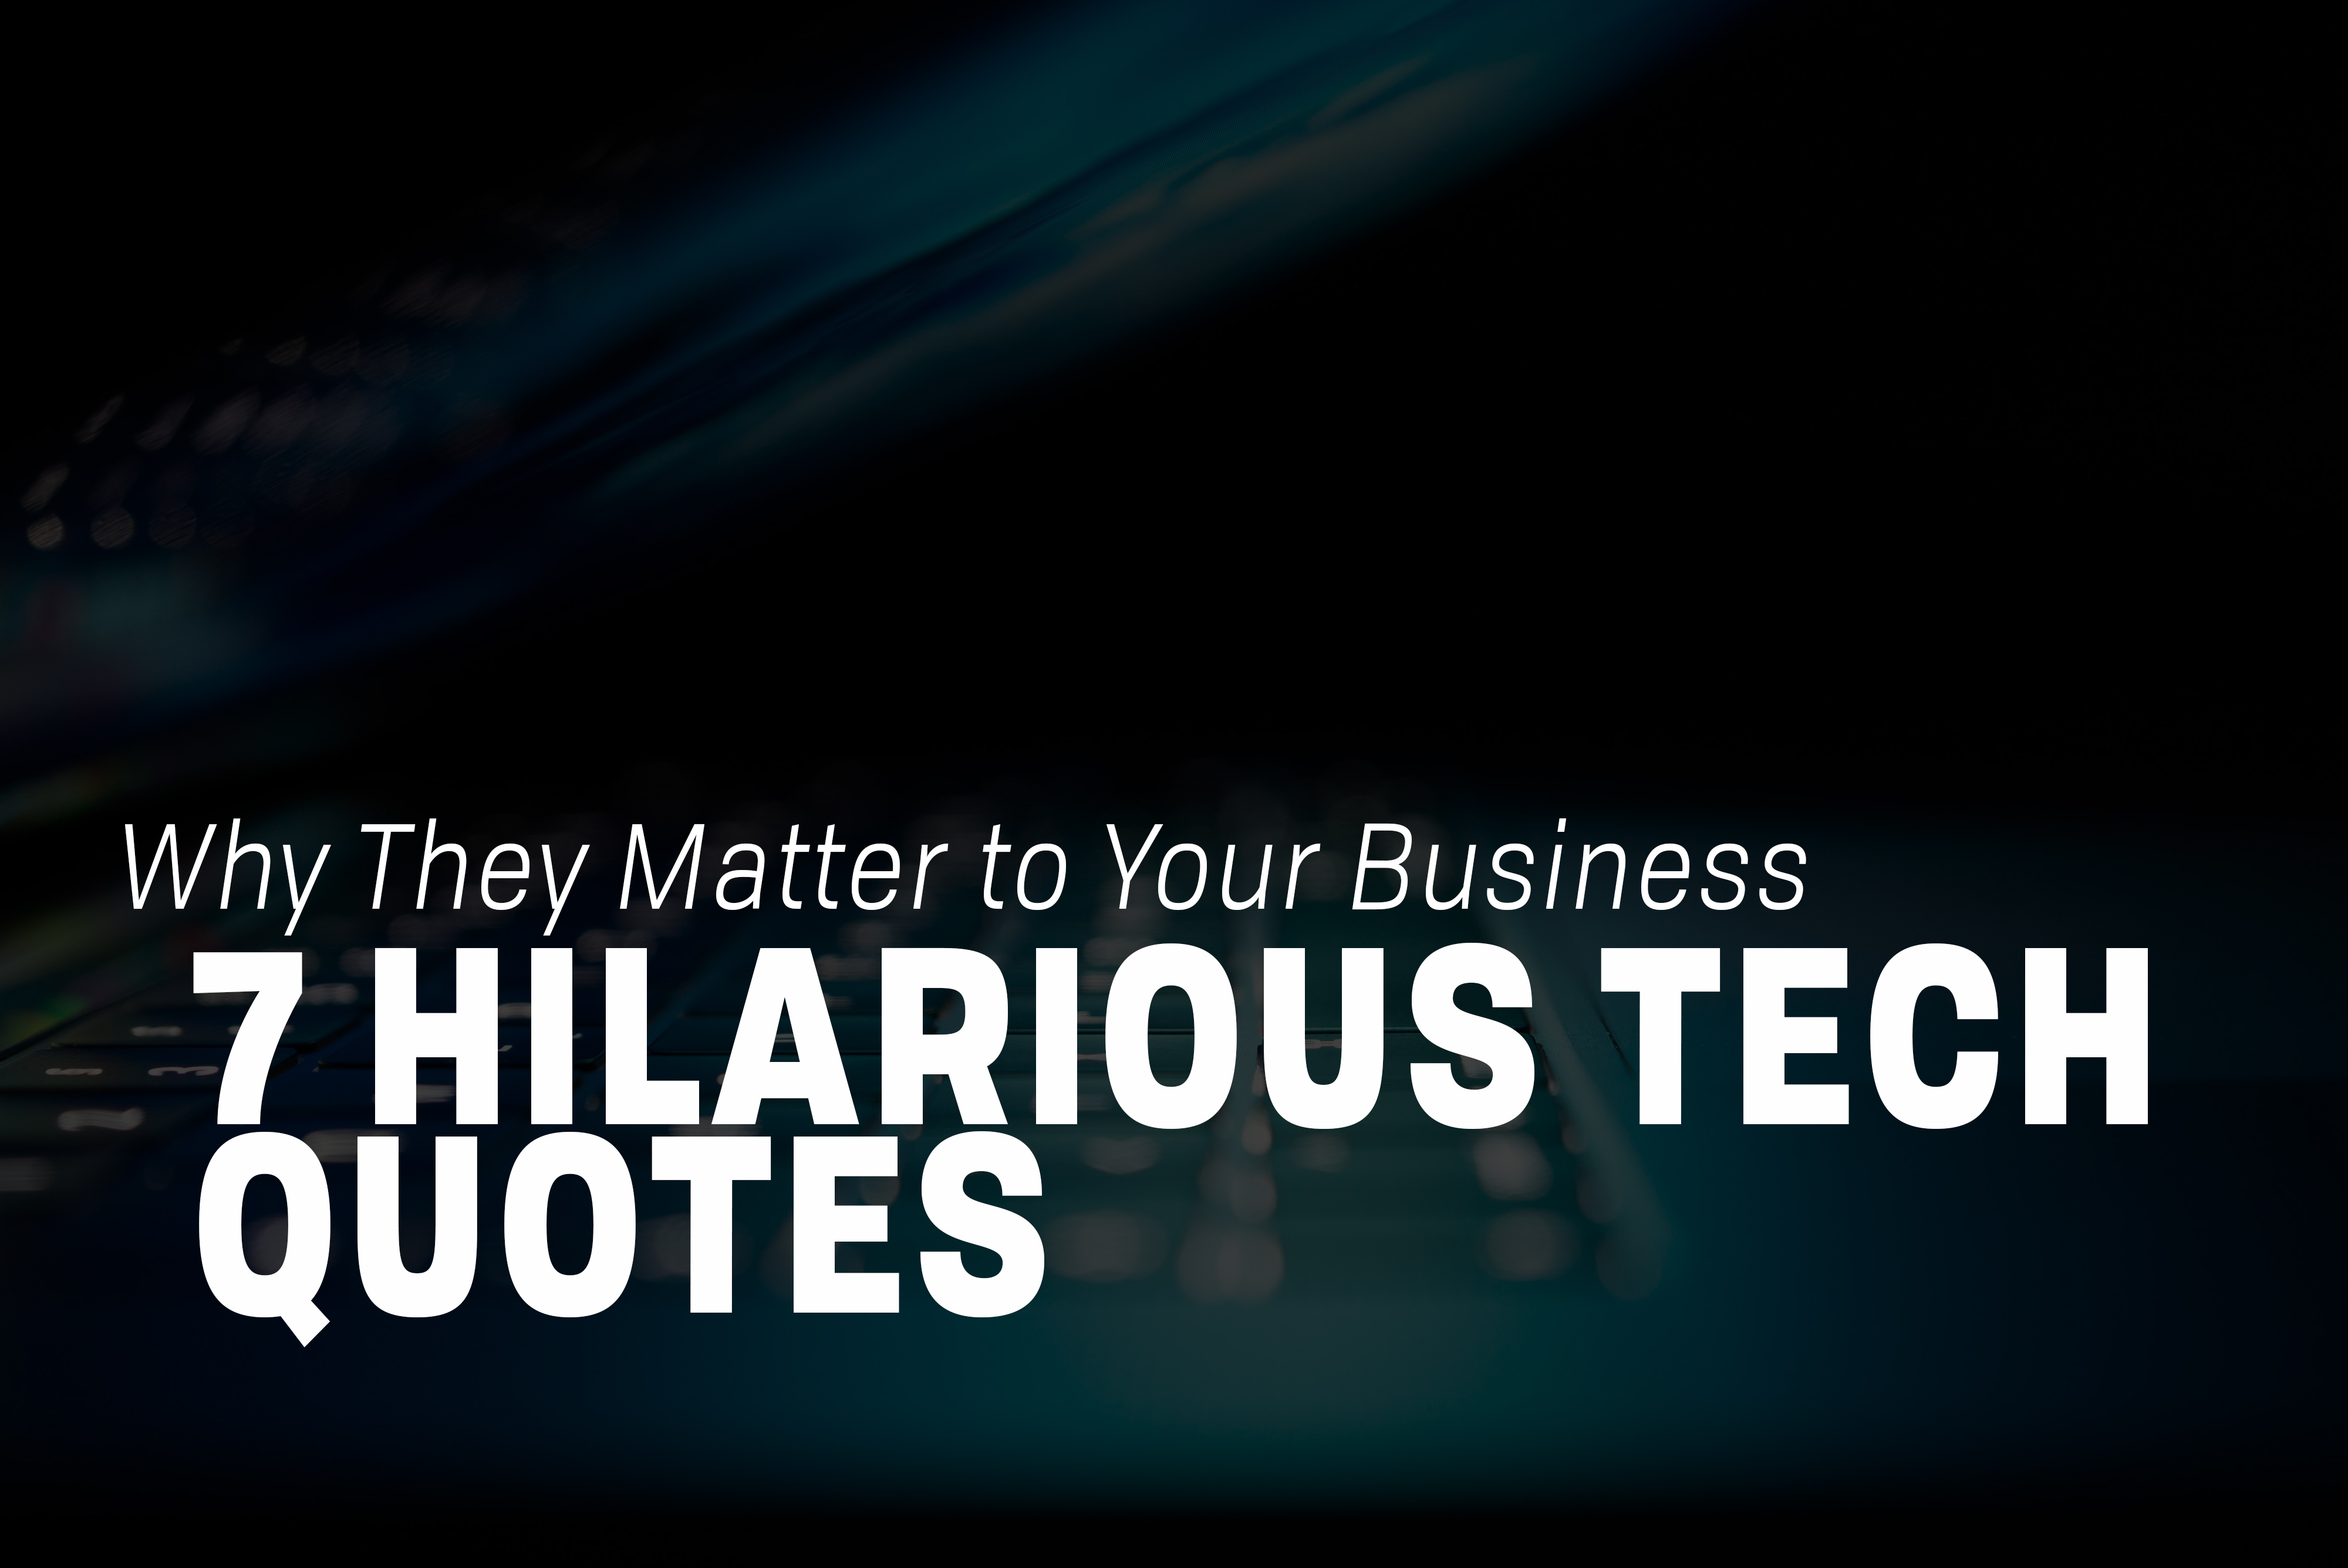 7 Hilarious Tech Quotes and Why They Matter to Your Business | CR-T